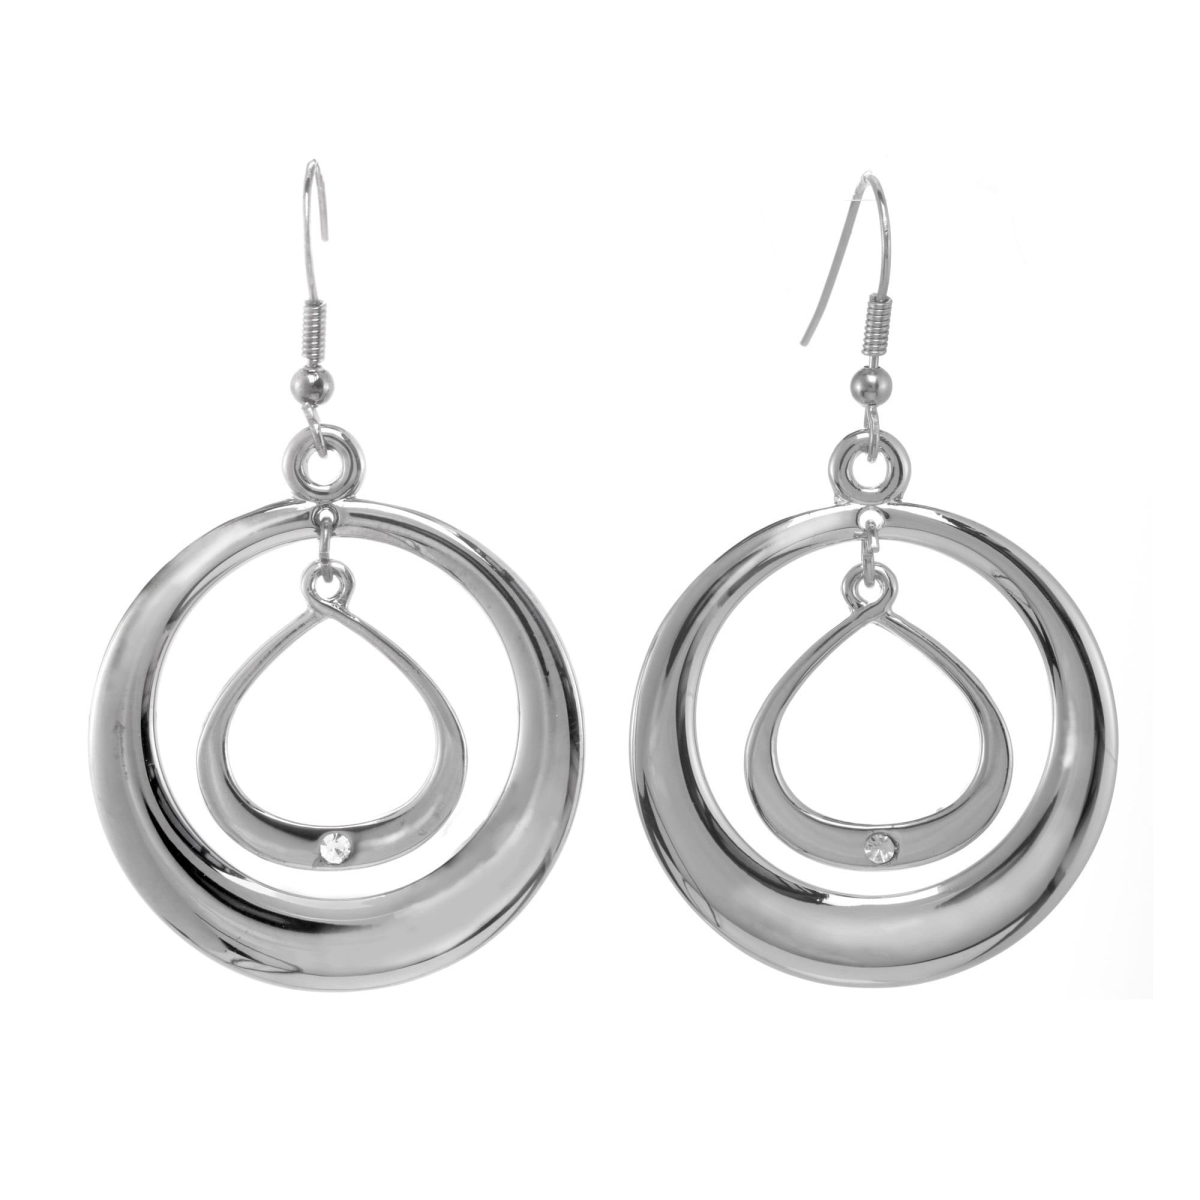 Picture of J&H Designs 9675-EP-Silvertone Double Inner Ring Drop Earrings